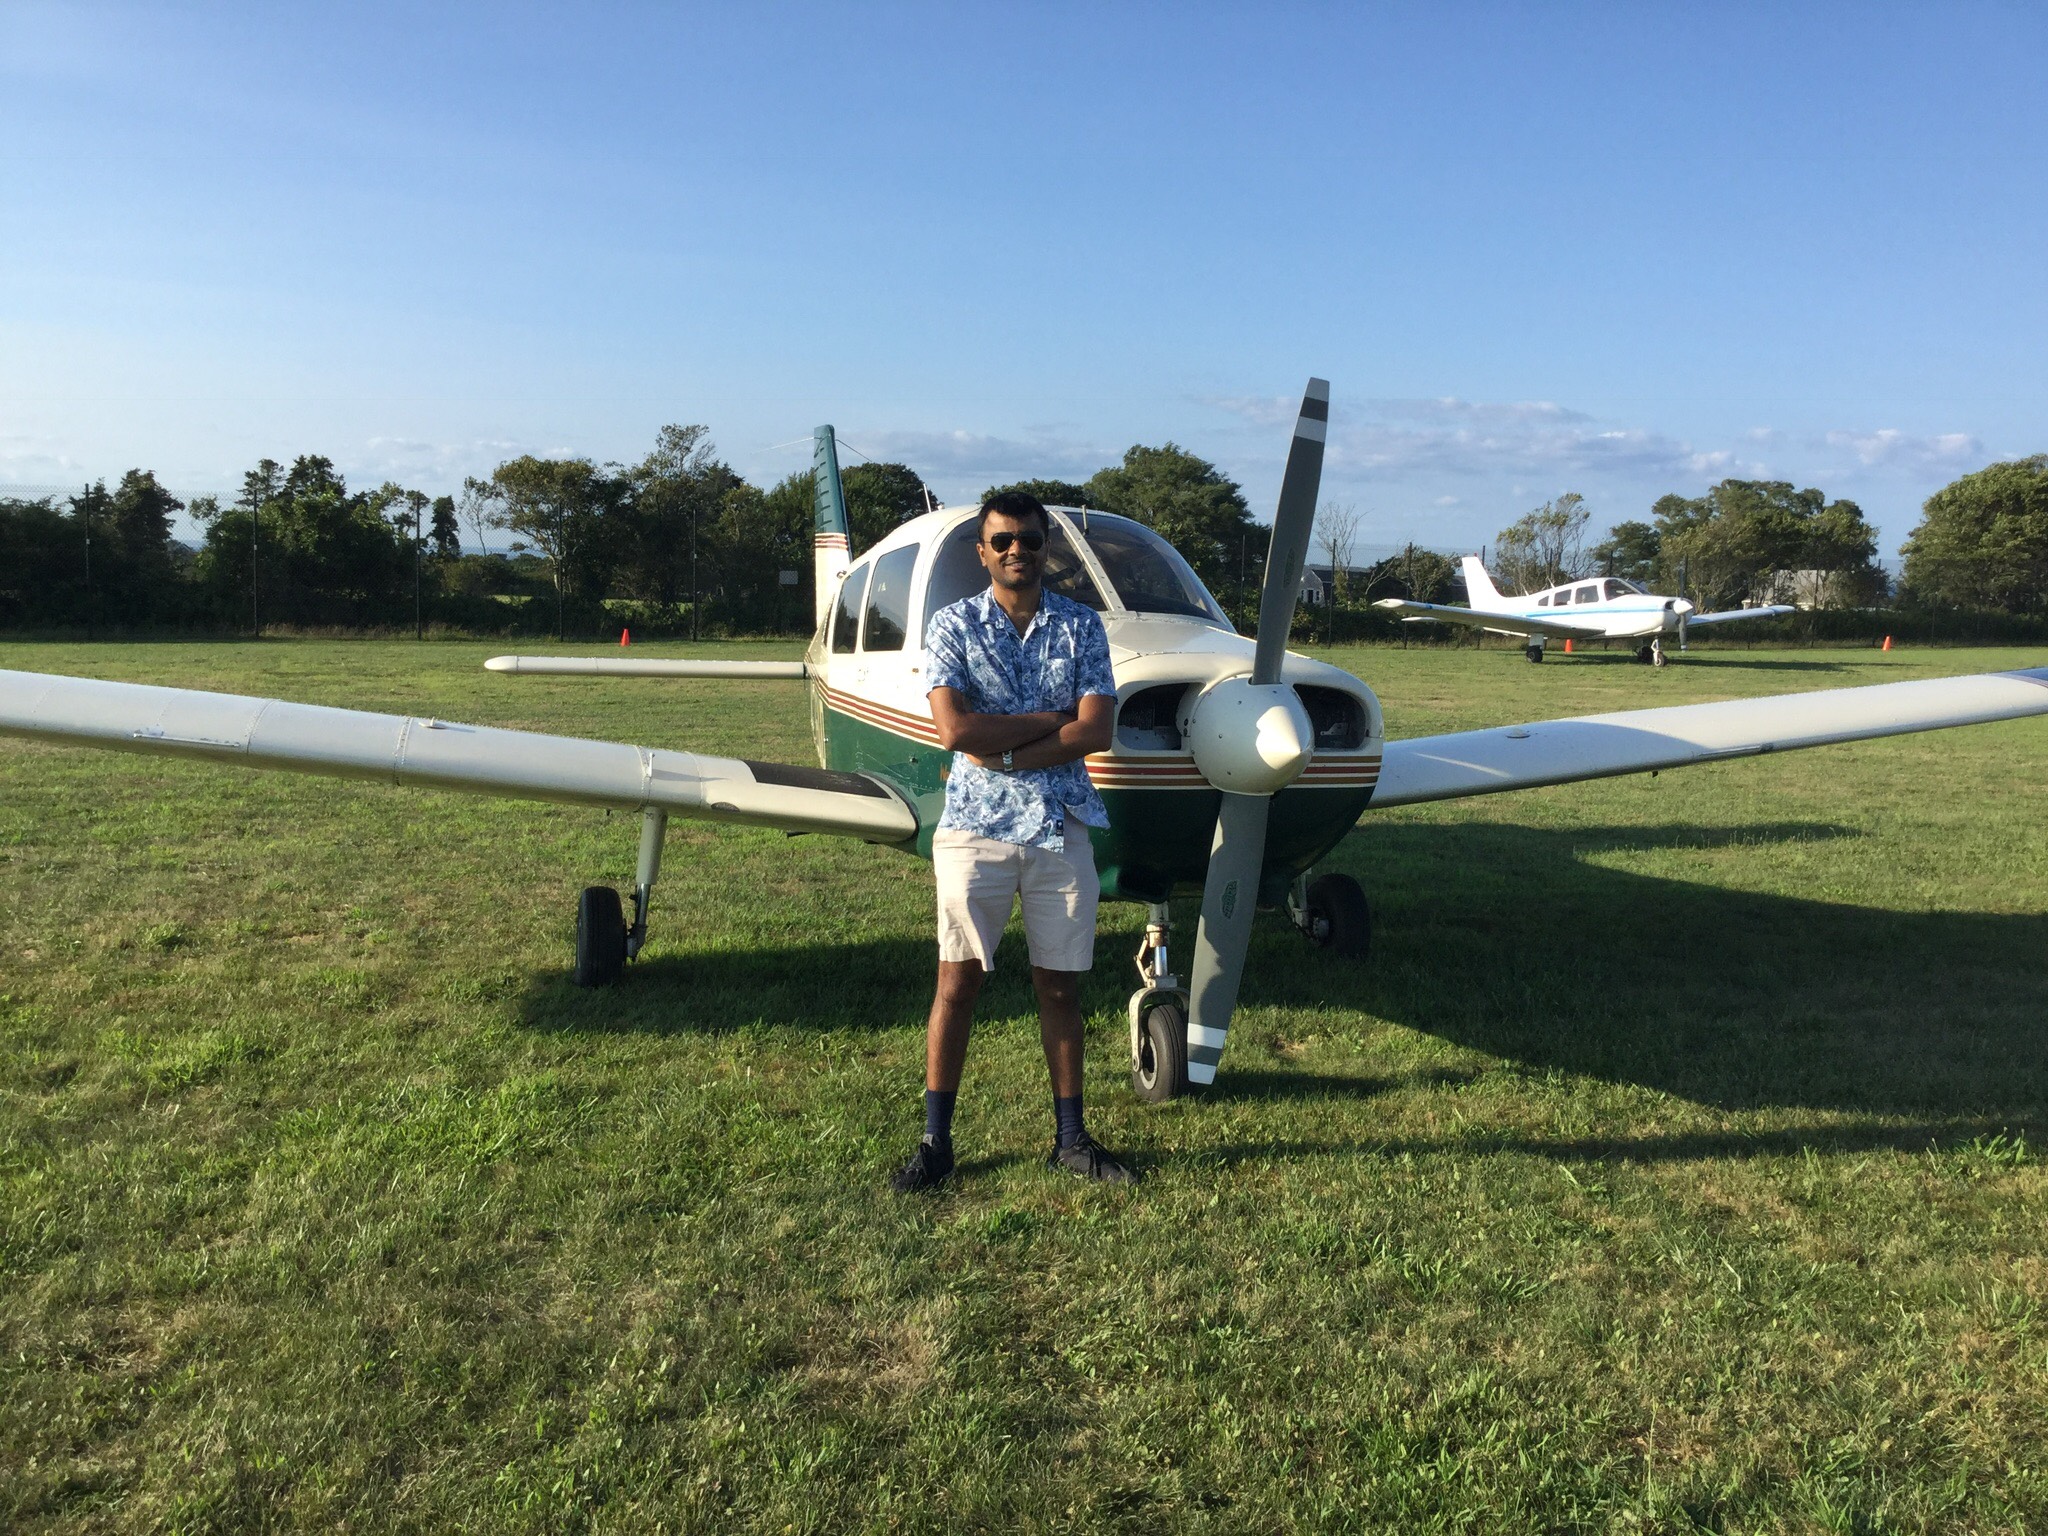 AAE PhD student Harish Saranathan won a paper competition and enjoys being a private pilot